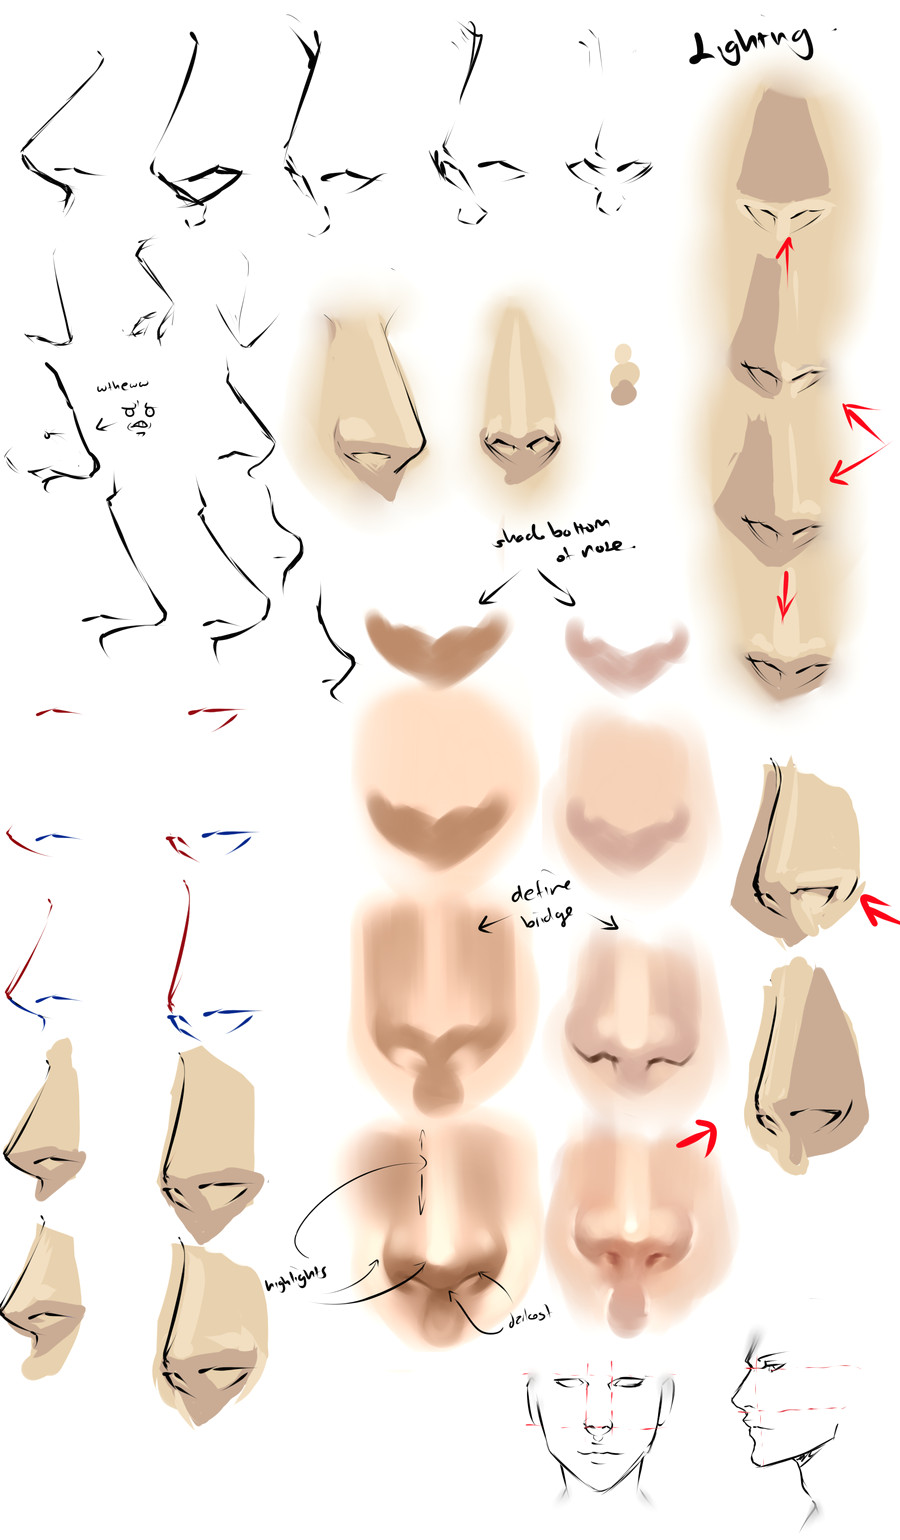 drawing anime noses by moni158 deviantart com art drawing painting tutorial lesson